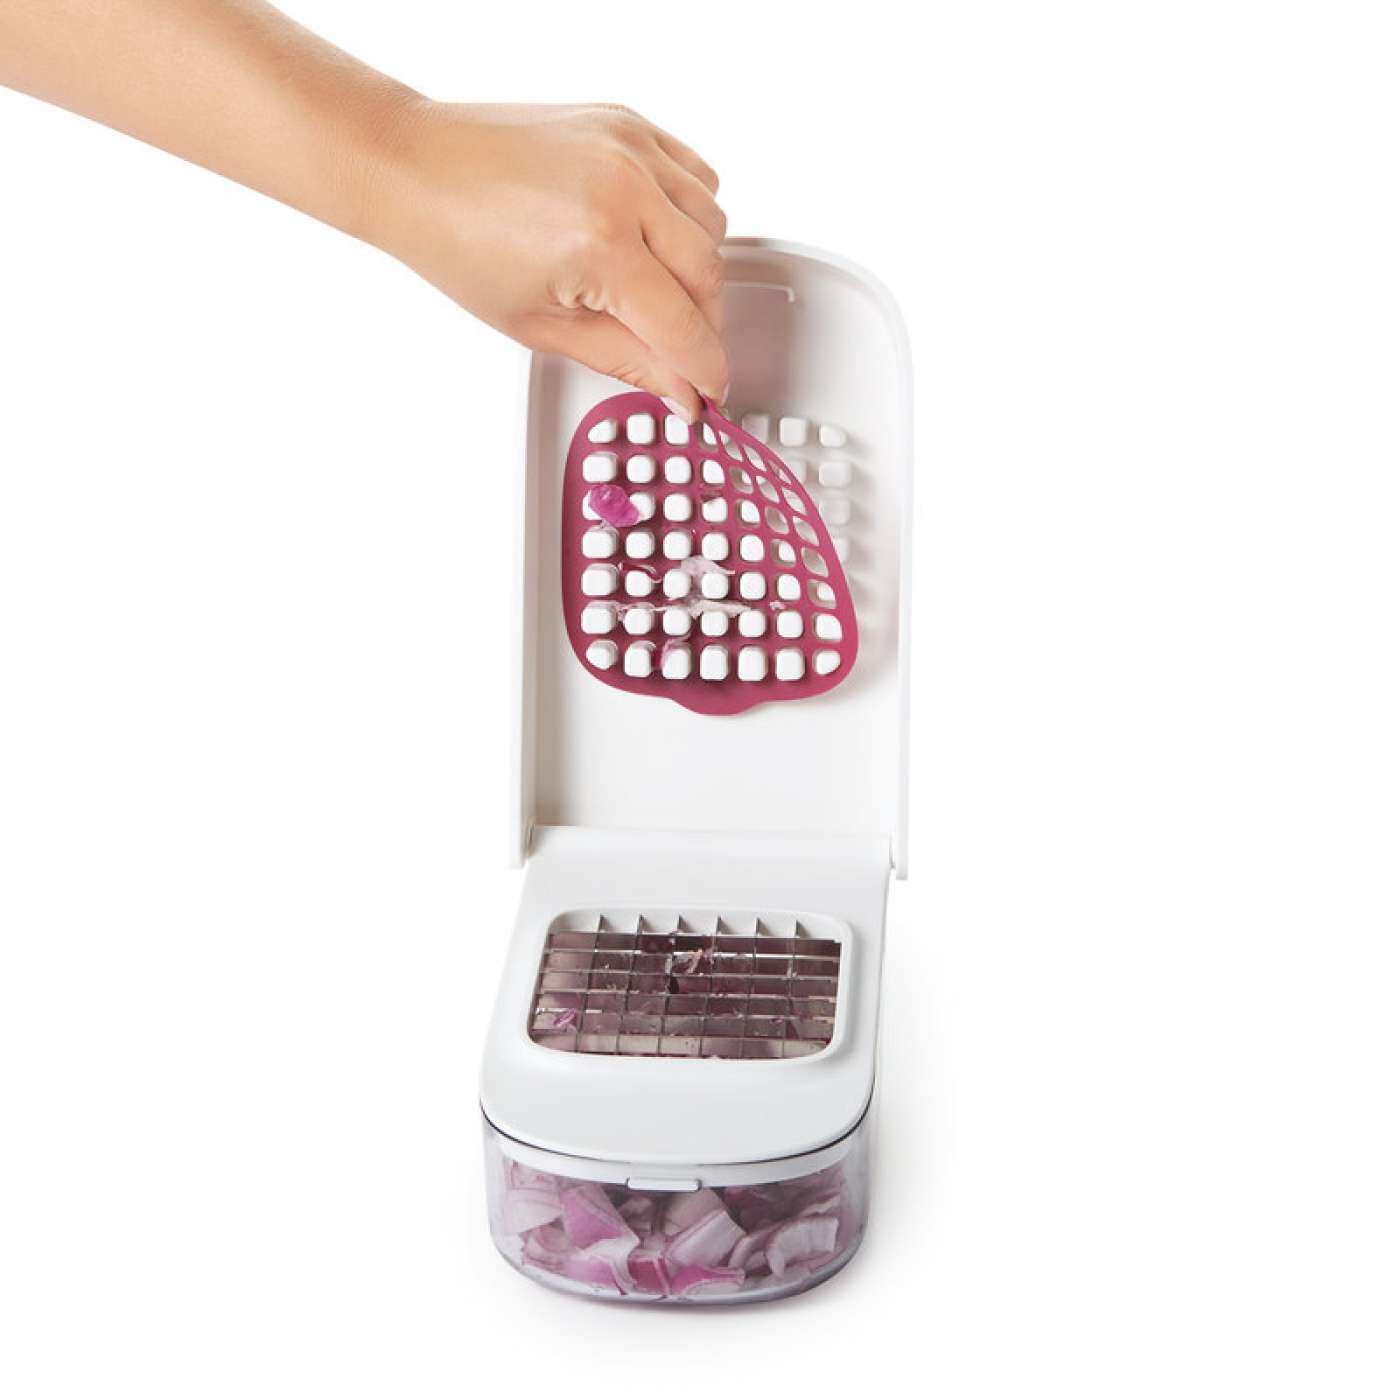 Chop Your Vegetables Quickly with OXO's Chopper 